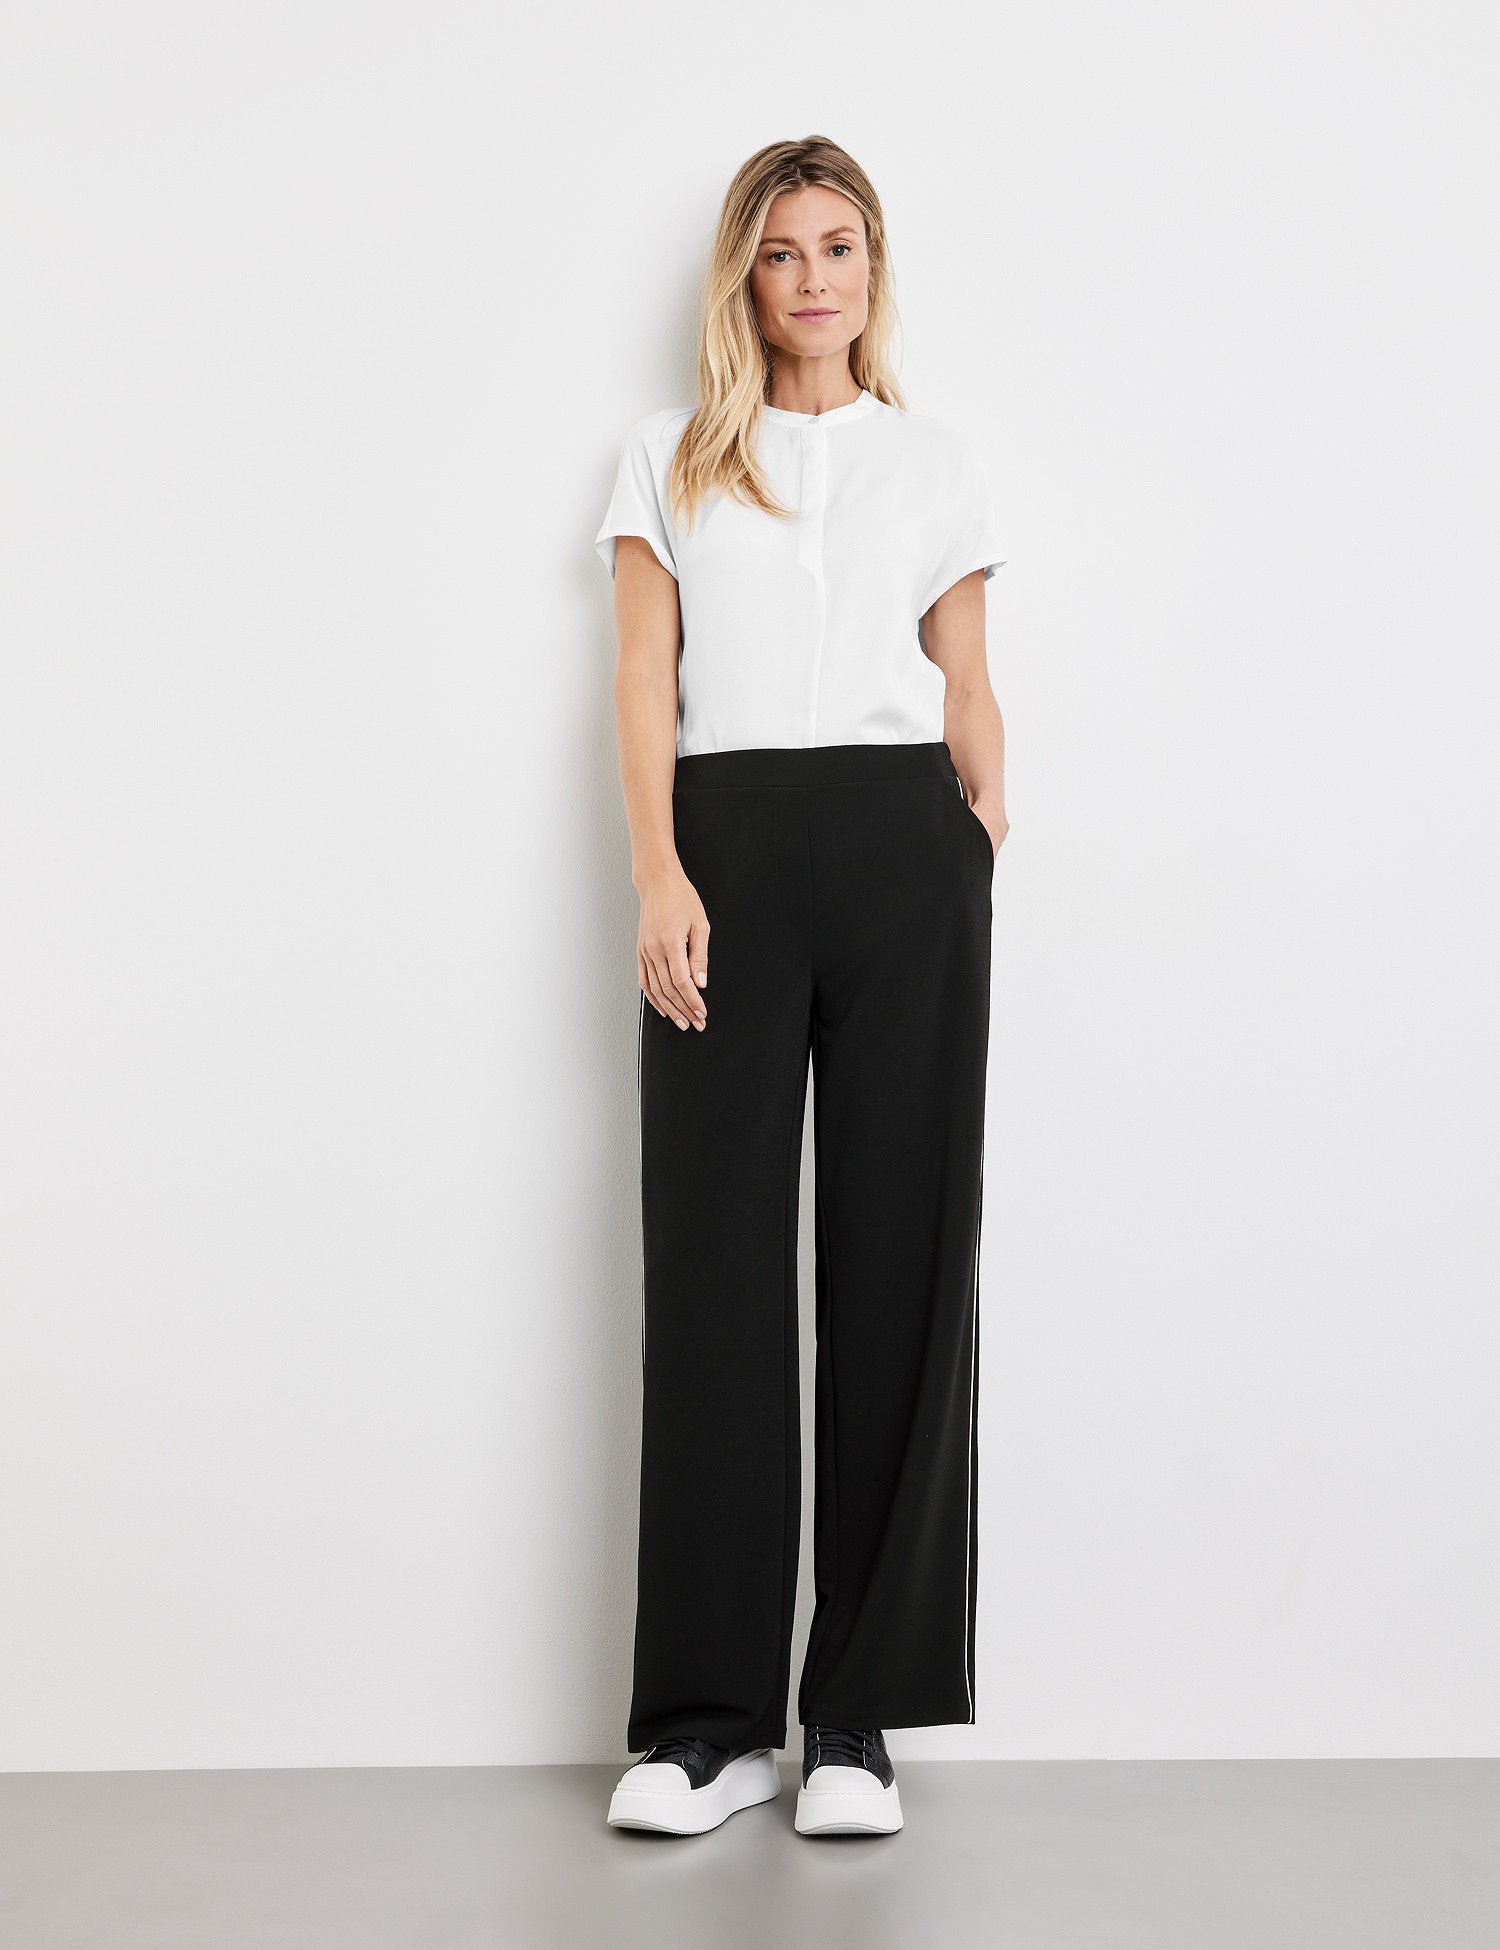 Slip-On Trousers With Side Piping_925009-35031_11000_01